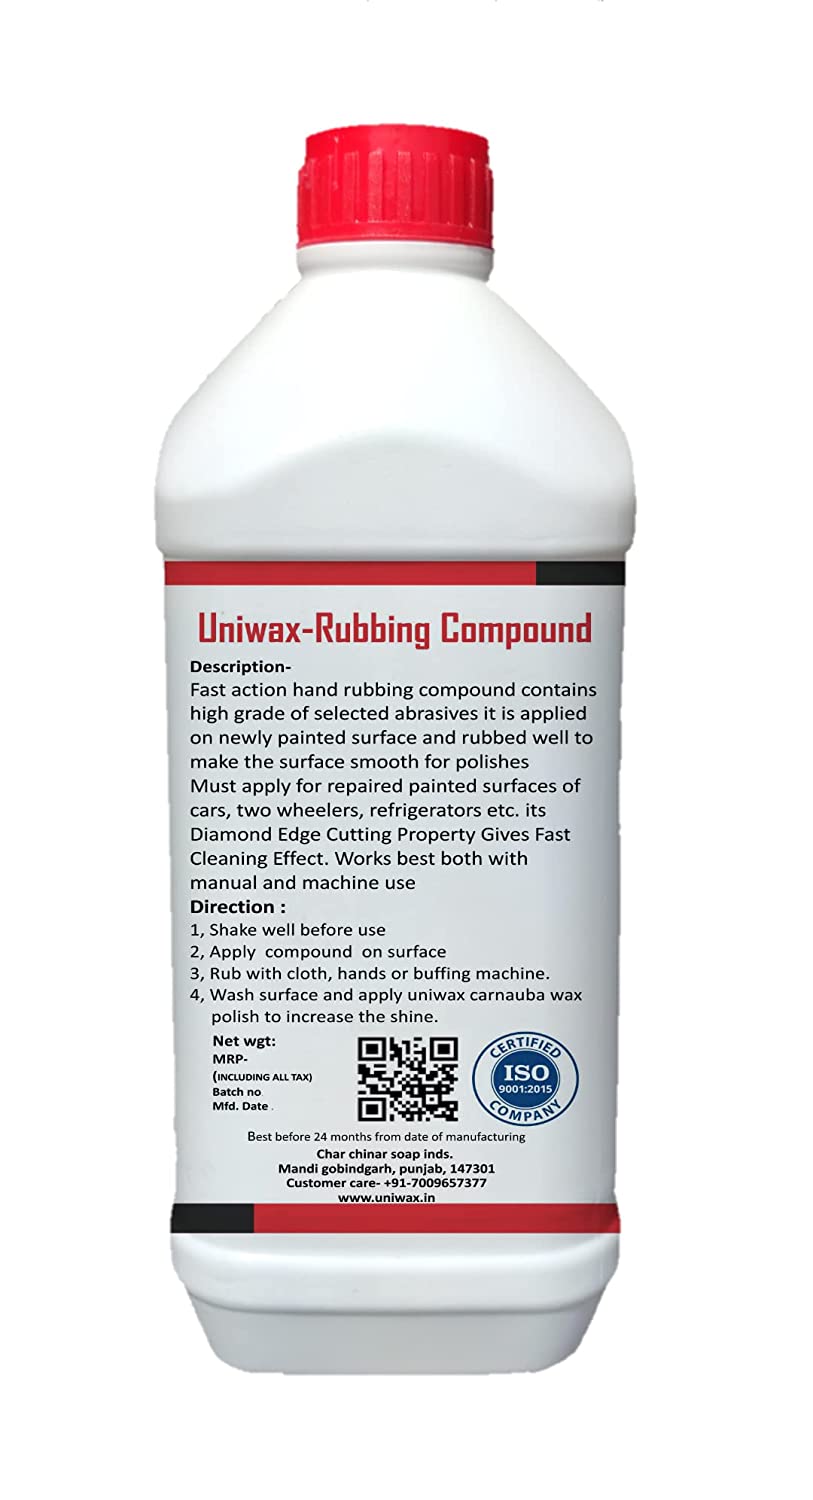 uniwax-car-rubbing-compound-with-wax-1-kg